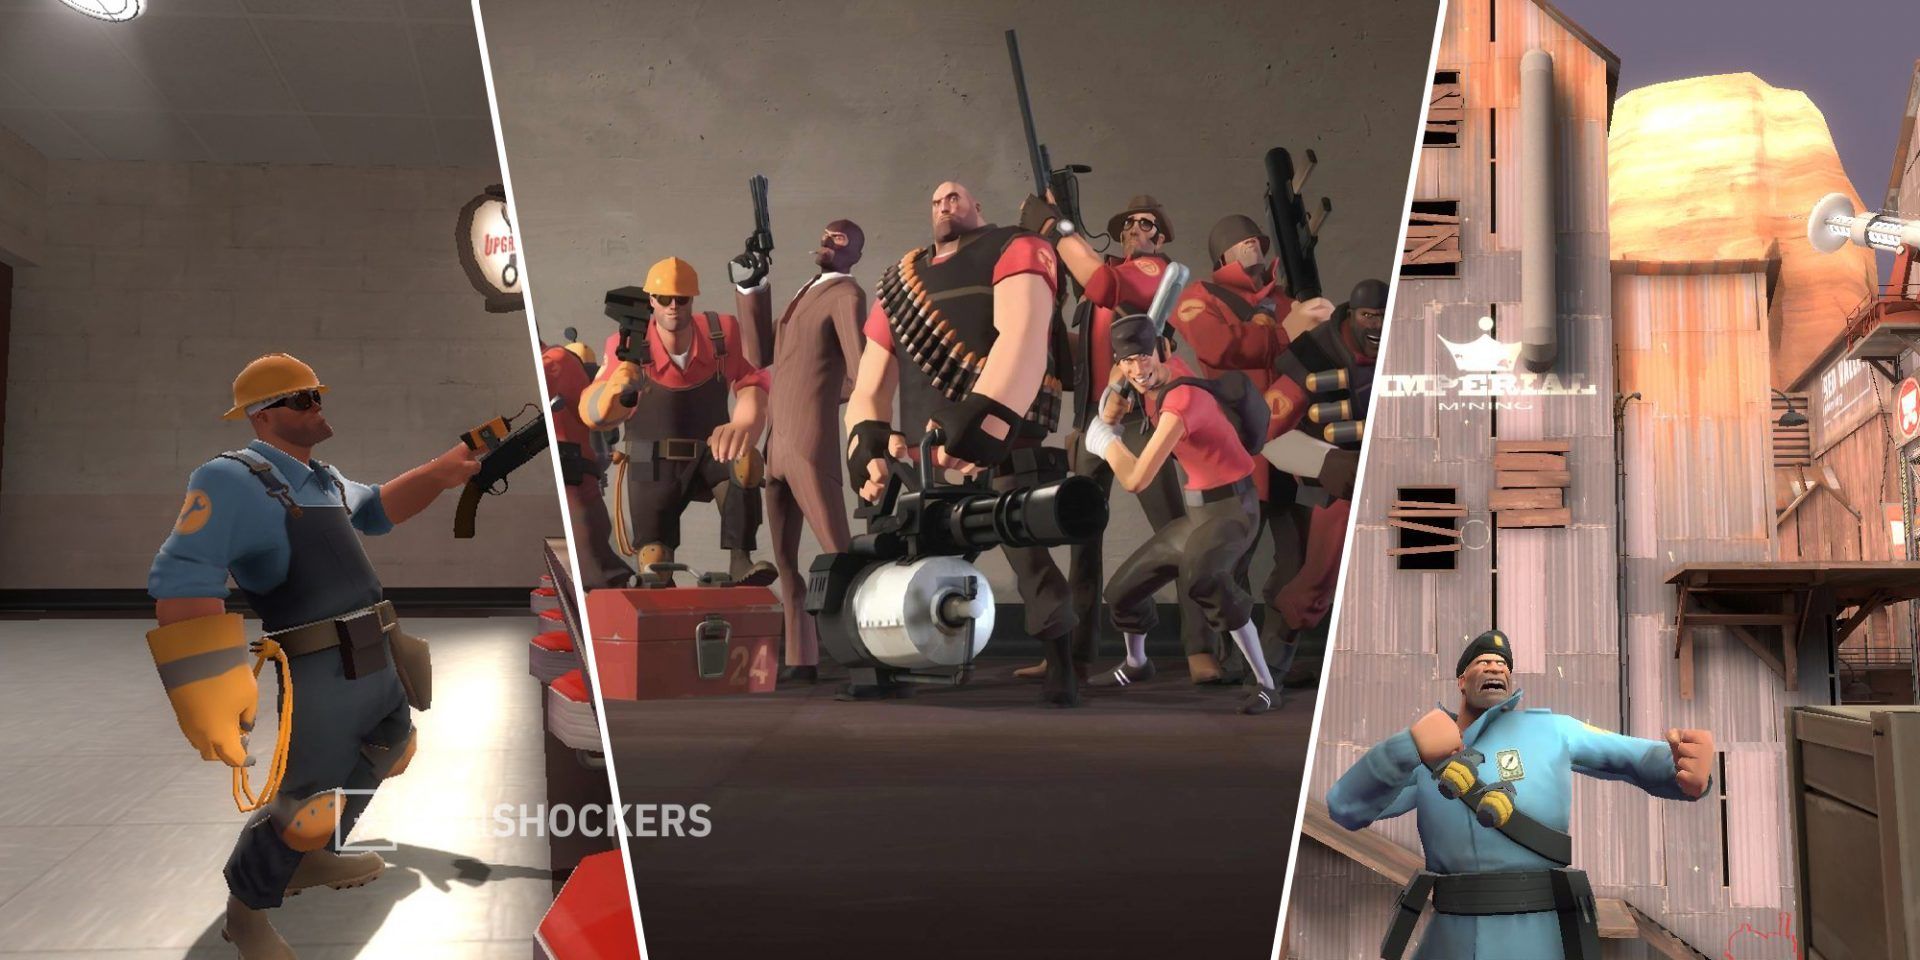 Team Fortress 2 Mann Co Store gun rental on left, Team Fortress 2 characters in middle and right